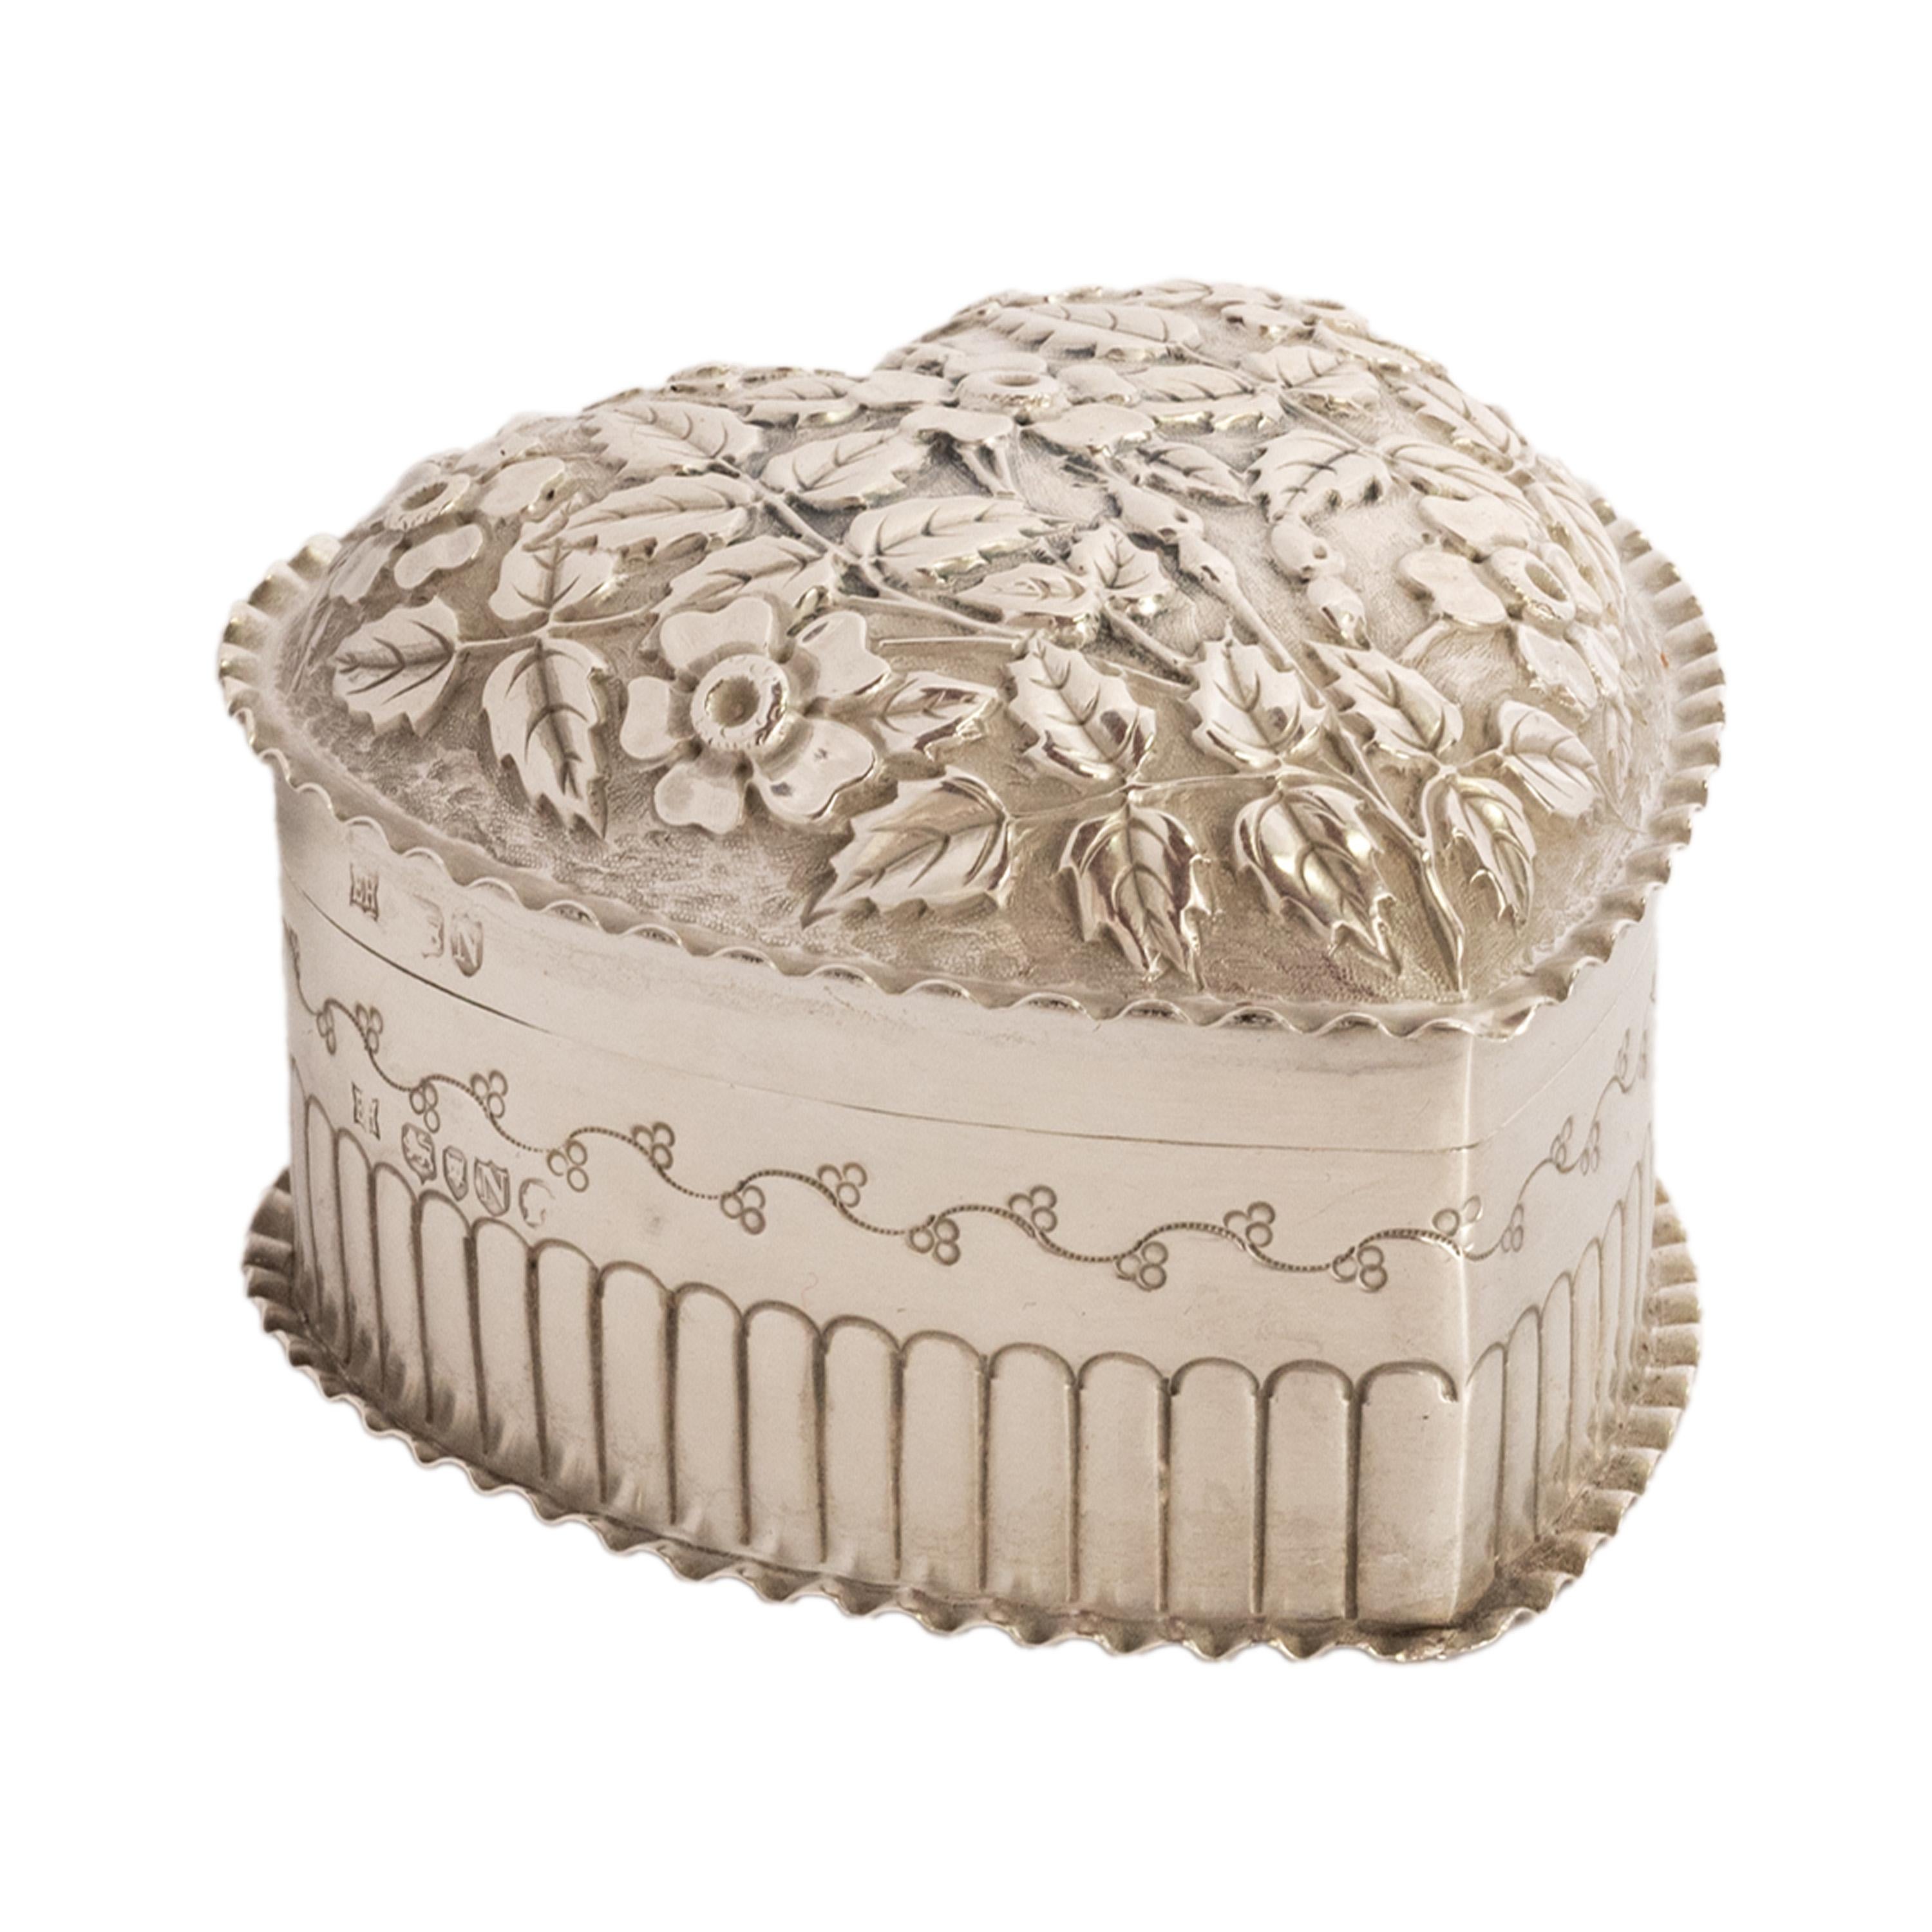 A very elegant antique sterling silver heart shaped trinket/jewelry box, William Hutton & Sons, London, 1888.
The hinged dome topped lid is finely decorated with repousse work flowers and leaves, the edge of the lid having a crimped 'pie crust'